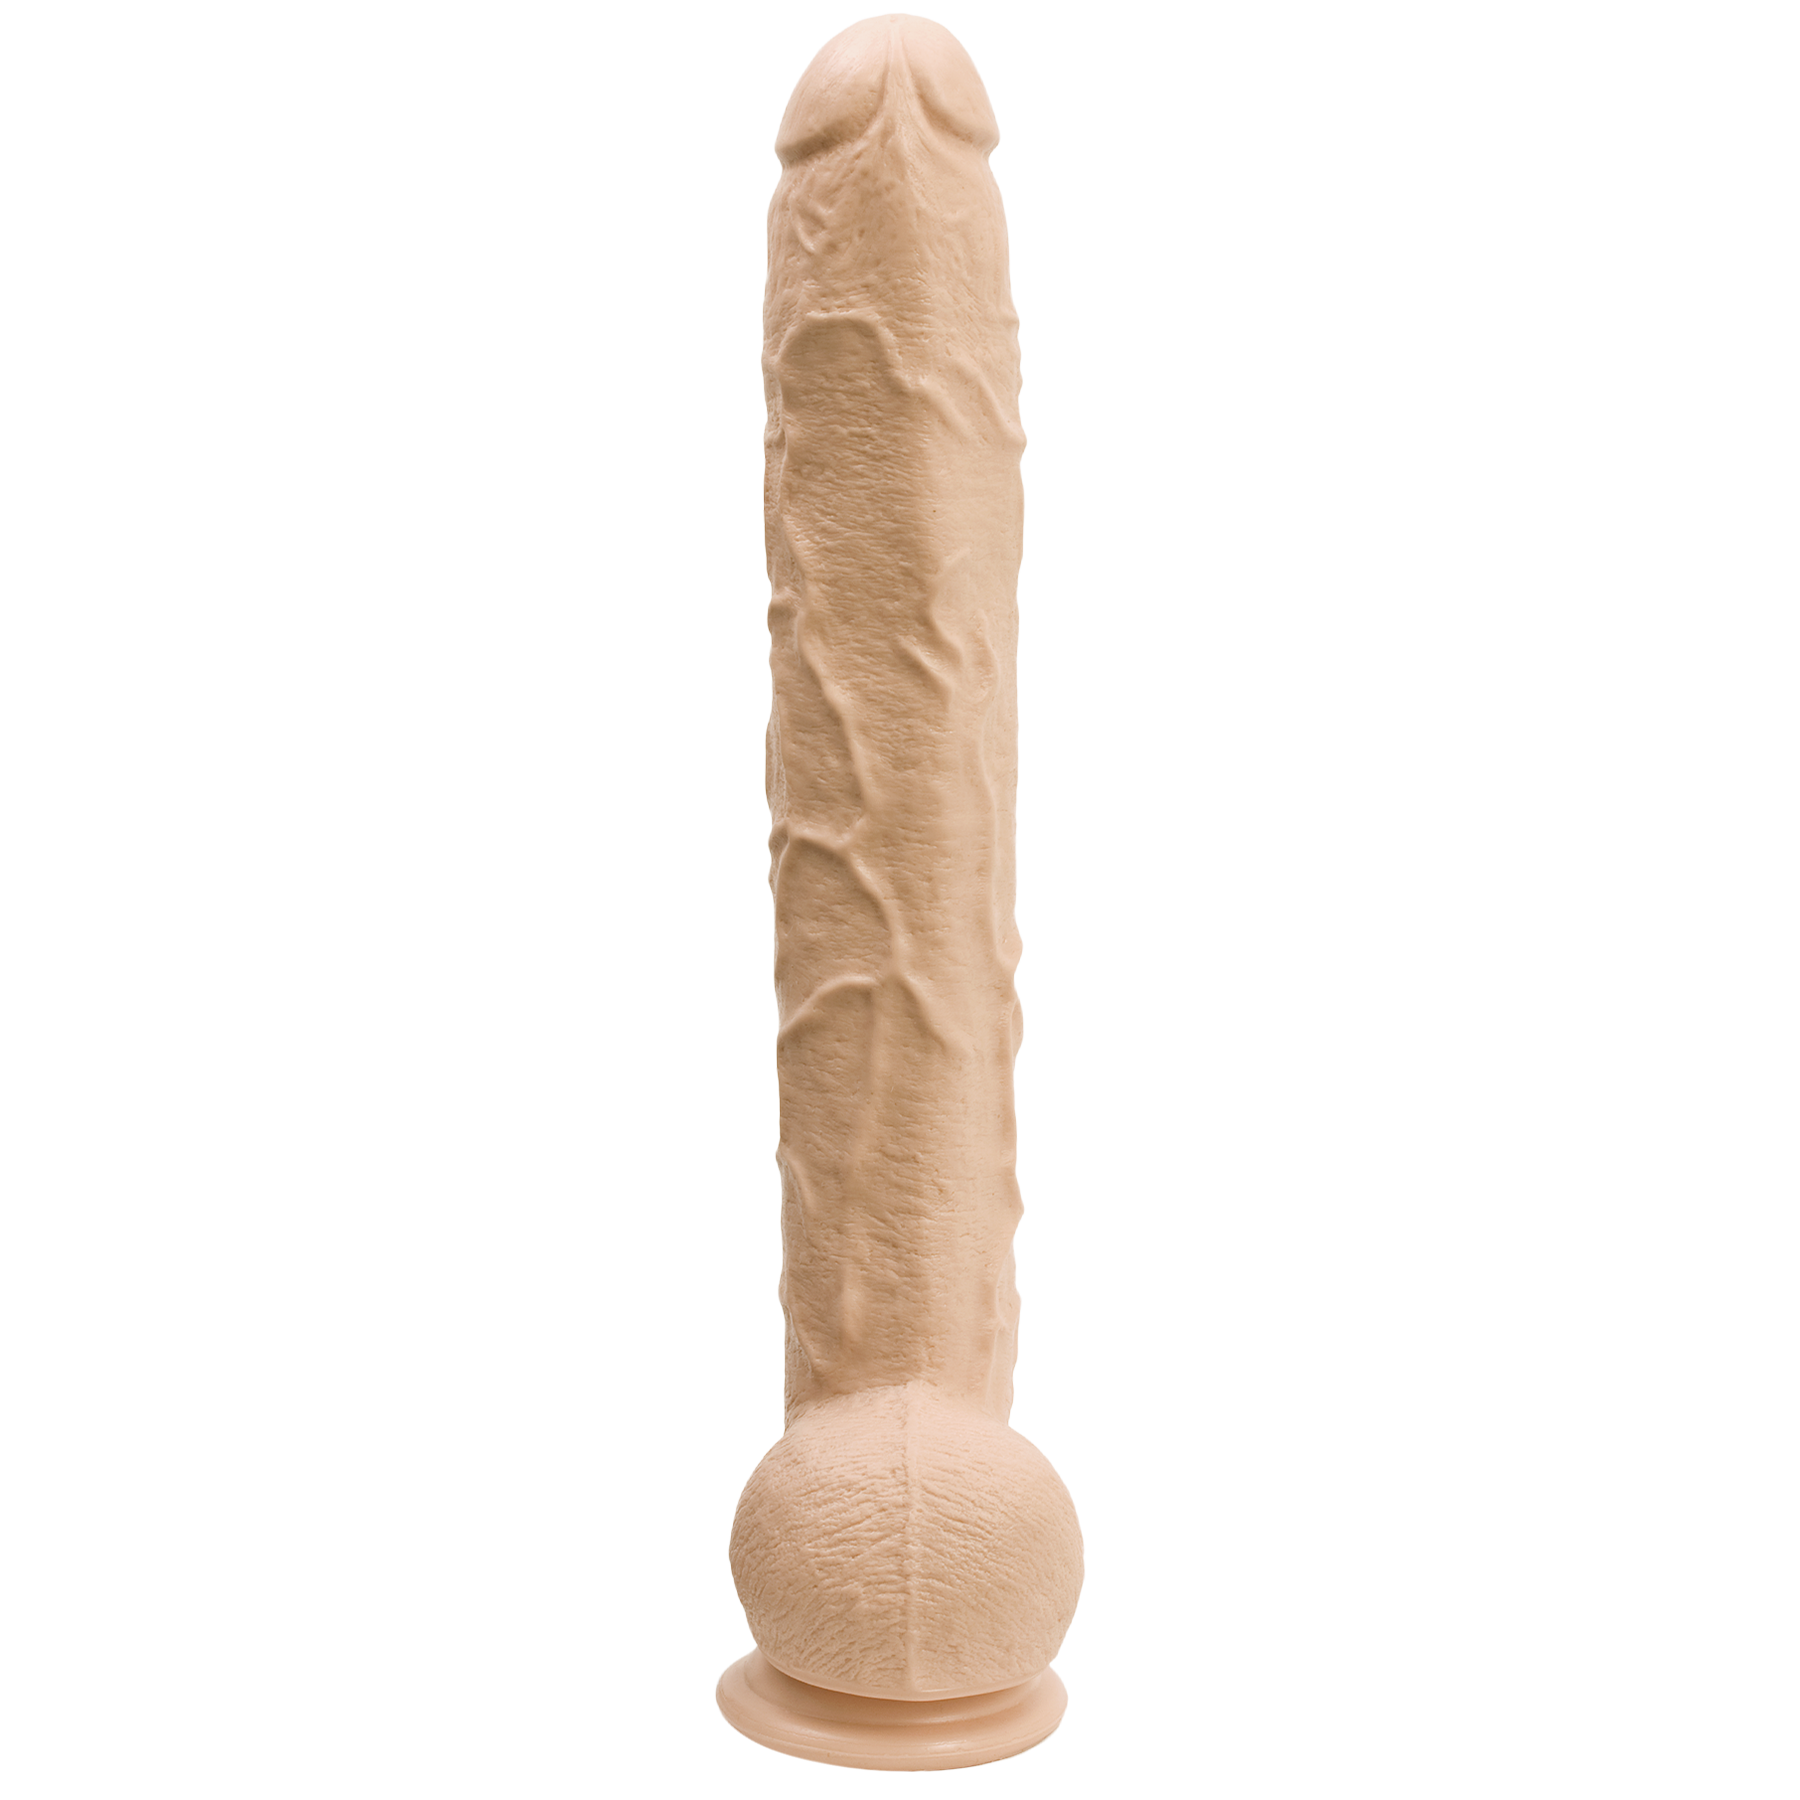 Dick Rambone Extreme Size Cock - White, 16" - Thorn & Feather Sex Toy Canada